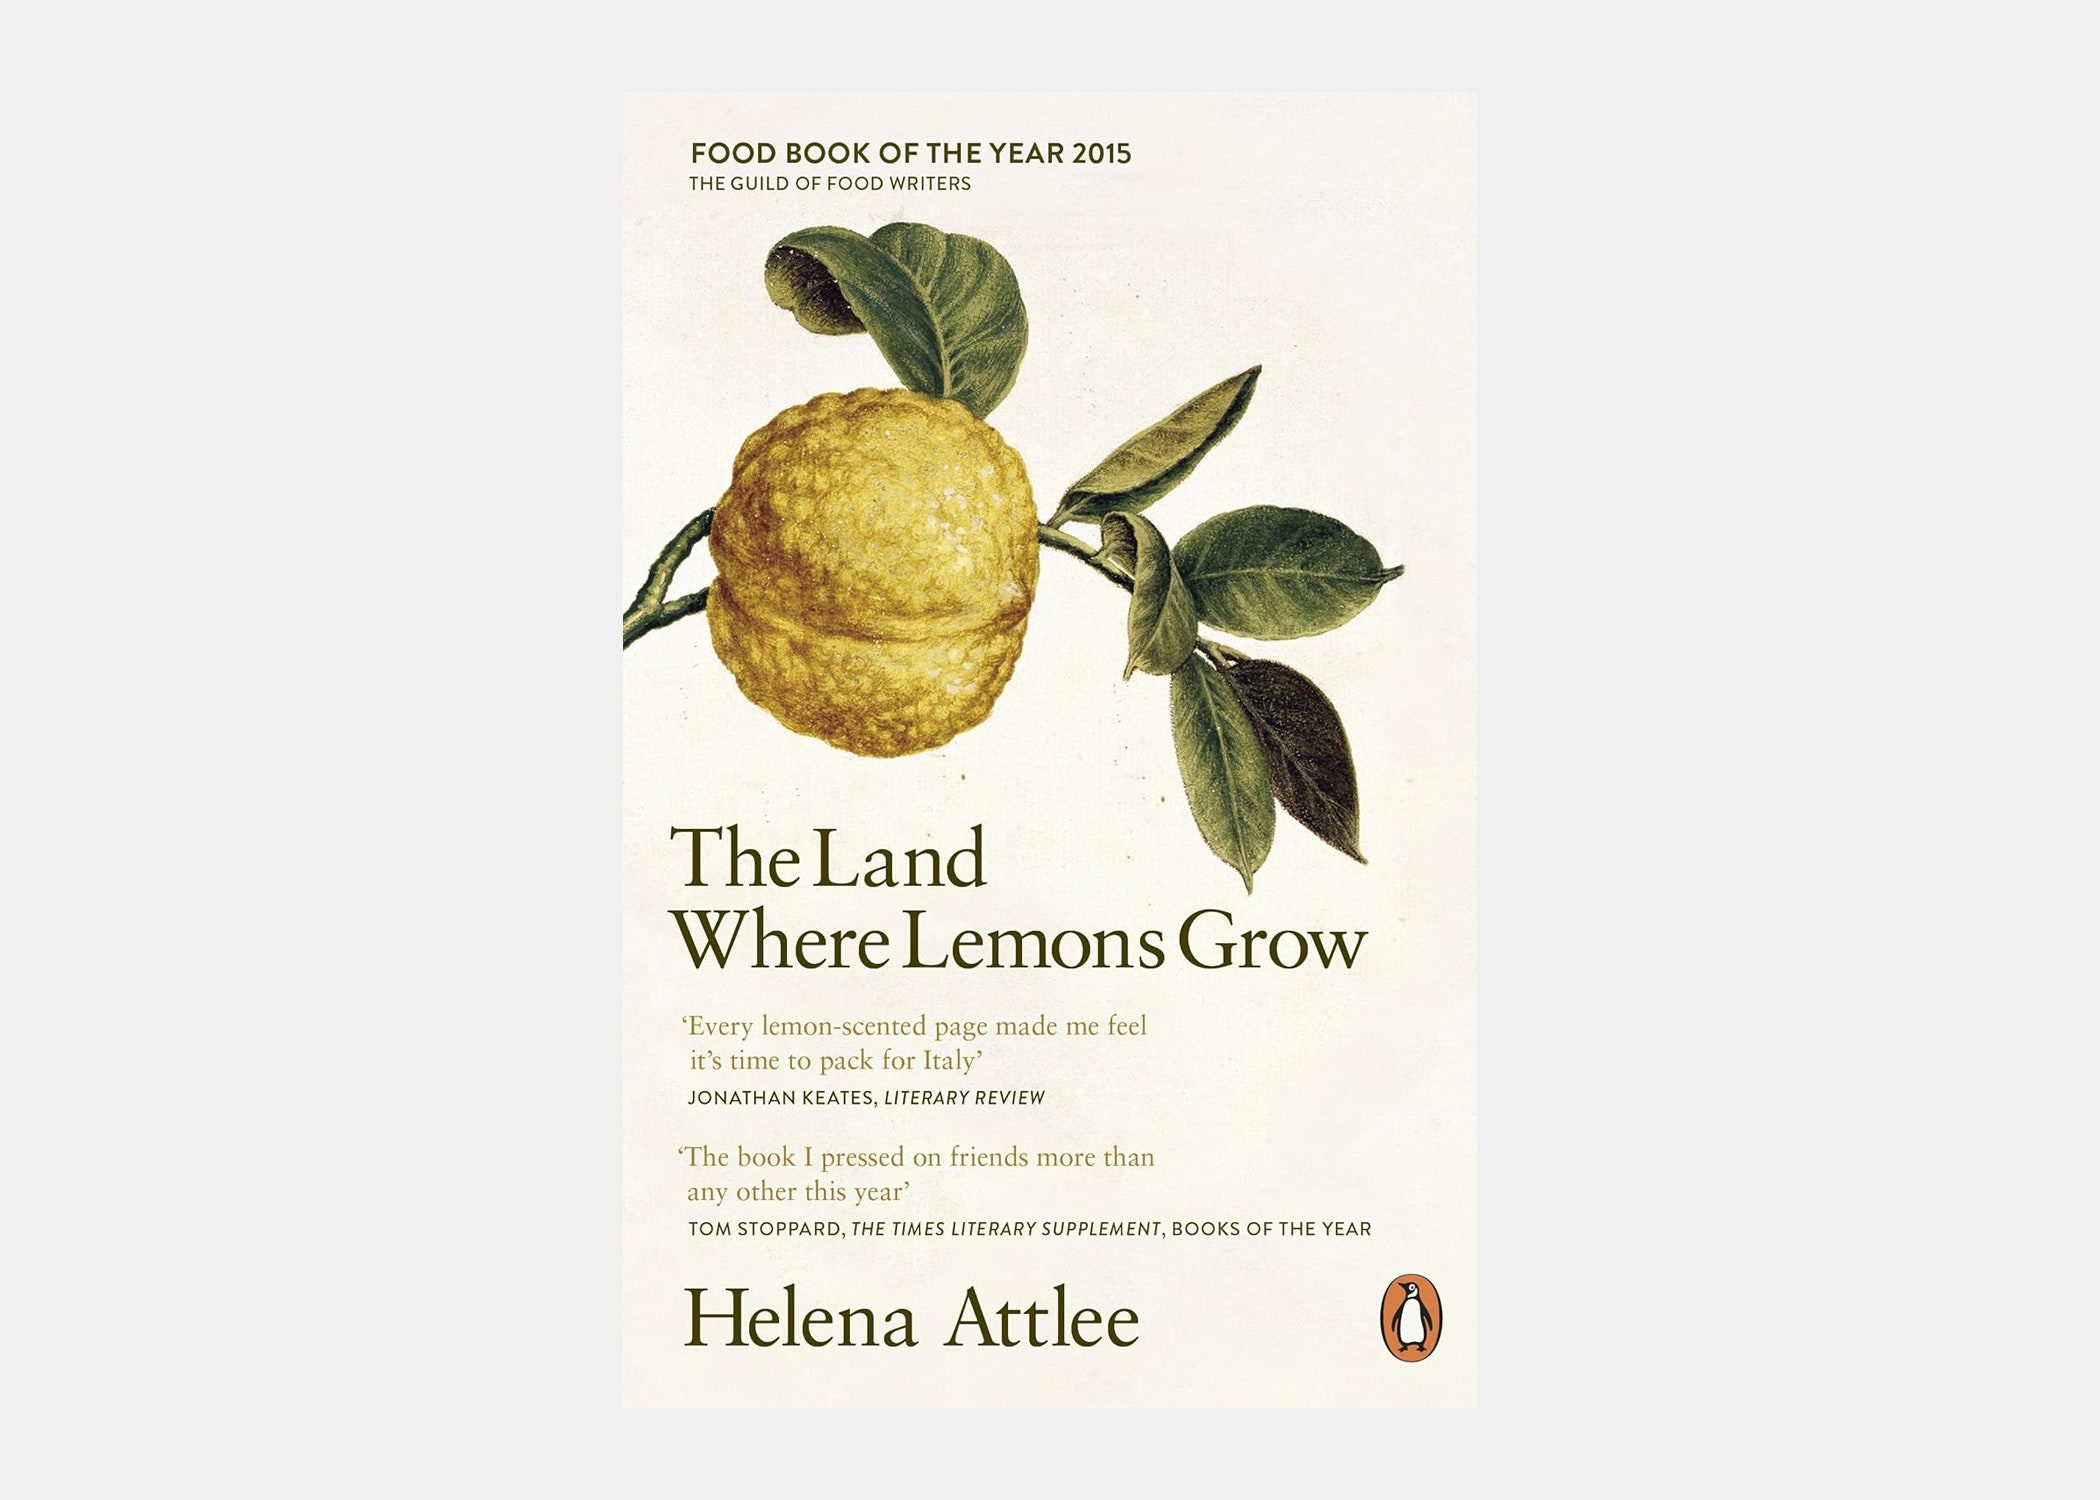 <p><strong>What it’s about:</strong> Fancy a visit to a marmalade kitchen in Sicily? To bergamot groves in Calabria? To lemon houses by the banks of Lago di Garda? You’ll get all that and more in this sumptuous and sensual history of citrus throughout the Italian peninsula. Helena Attlee blends her deep knowledge of the country with insightful gastronomical observations—and recipes!—to make an immensely readable and giftable volume that’s as fragrant as a helping of delizia al limone on a terrace in Amalfi.</p> <p><strong>The mood it’s giving:</strong> As sharp and sparkling, tart and satisfying as a limoncello spritz</p> <p><strong>The book’s first line:</strong> “At dawn, I lifted a corner of the curtain in the stuffy couchette and realized we had already crossed the border. We were somewhere near Ventimiglia on the Italian Riviera, and there were lemons growing beside the station platform, their dark leaves and bright fruit set against a backdrop of nothing but sea.”</p> $20, Amazon. <a href="https://www.amazon.com/Land-Where-Lemons-Grow-Citrus/dp/1581572905/ref=sr_1_1?crid=3EUTM5P0TPE49&keywords=The+Land+Where+Lemons+Grow%3A+The+Story+of+Italy+and+Its+Citrus+Fruit+by+Helena+Attlee&qid=1698281920&s=books&sprefix=the+land+where+lemons+grow+the+story+of+italy+and+its+citrus+fruit+by+helena+attlee%2Cstripbooks%2C138&sr=1-1">Get it now!</a><p>Sign up to receive the latest news, expert tips, and inspiration on all things travel</p><a href="https://www.cntraveler.com/newsletter/the-daily?sourceCode=msnsend">Inspire Me</a>